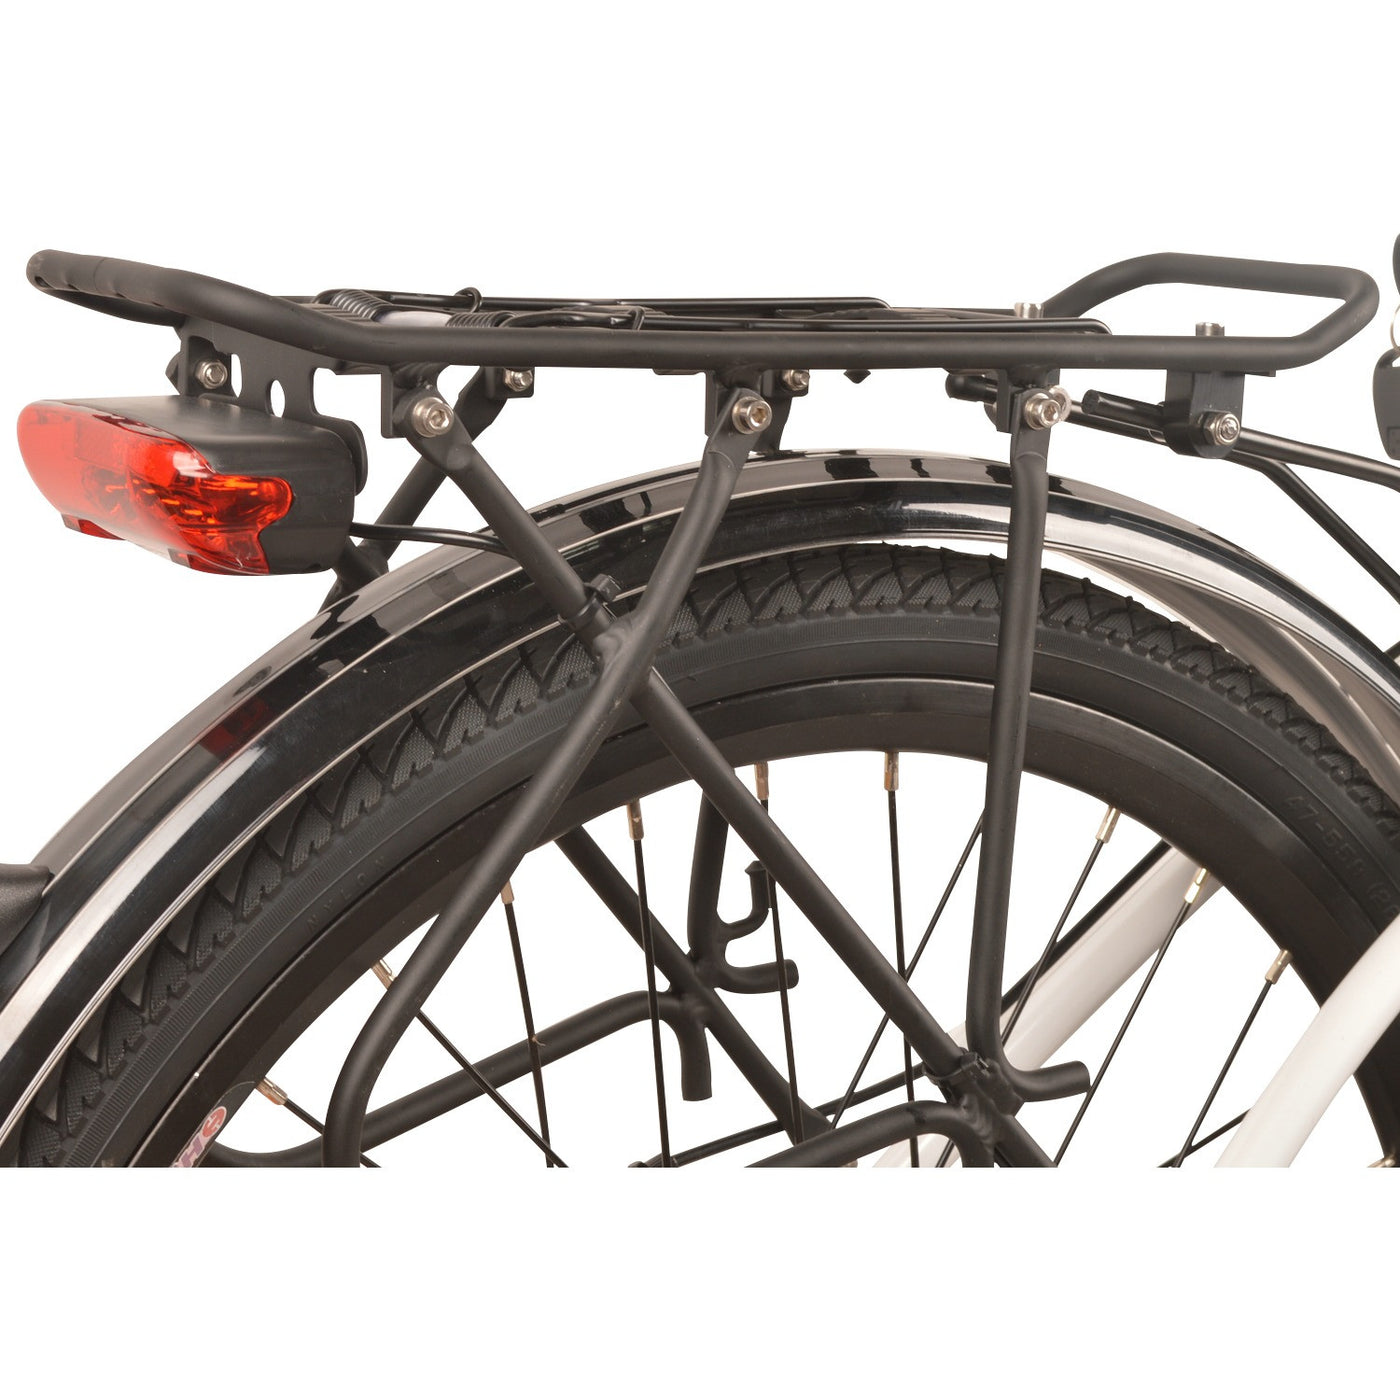 DJ City Bike rear rack, integrated tail light and fenders are included in price